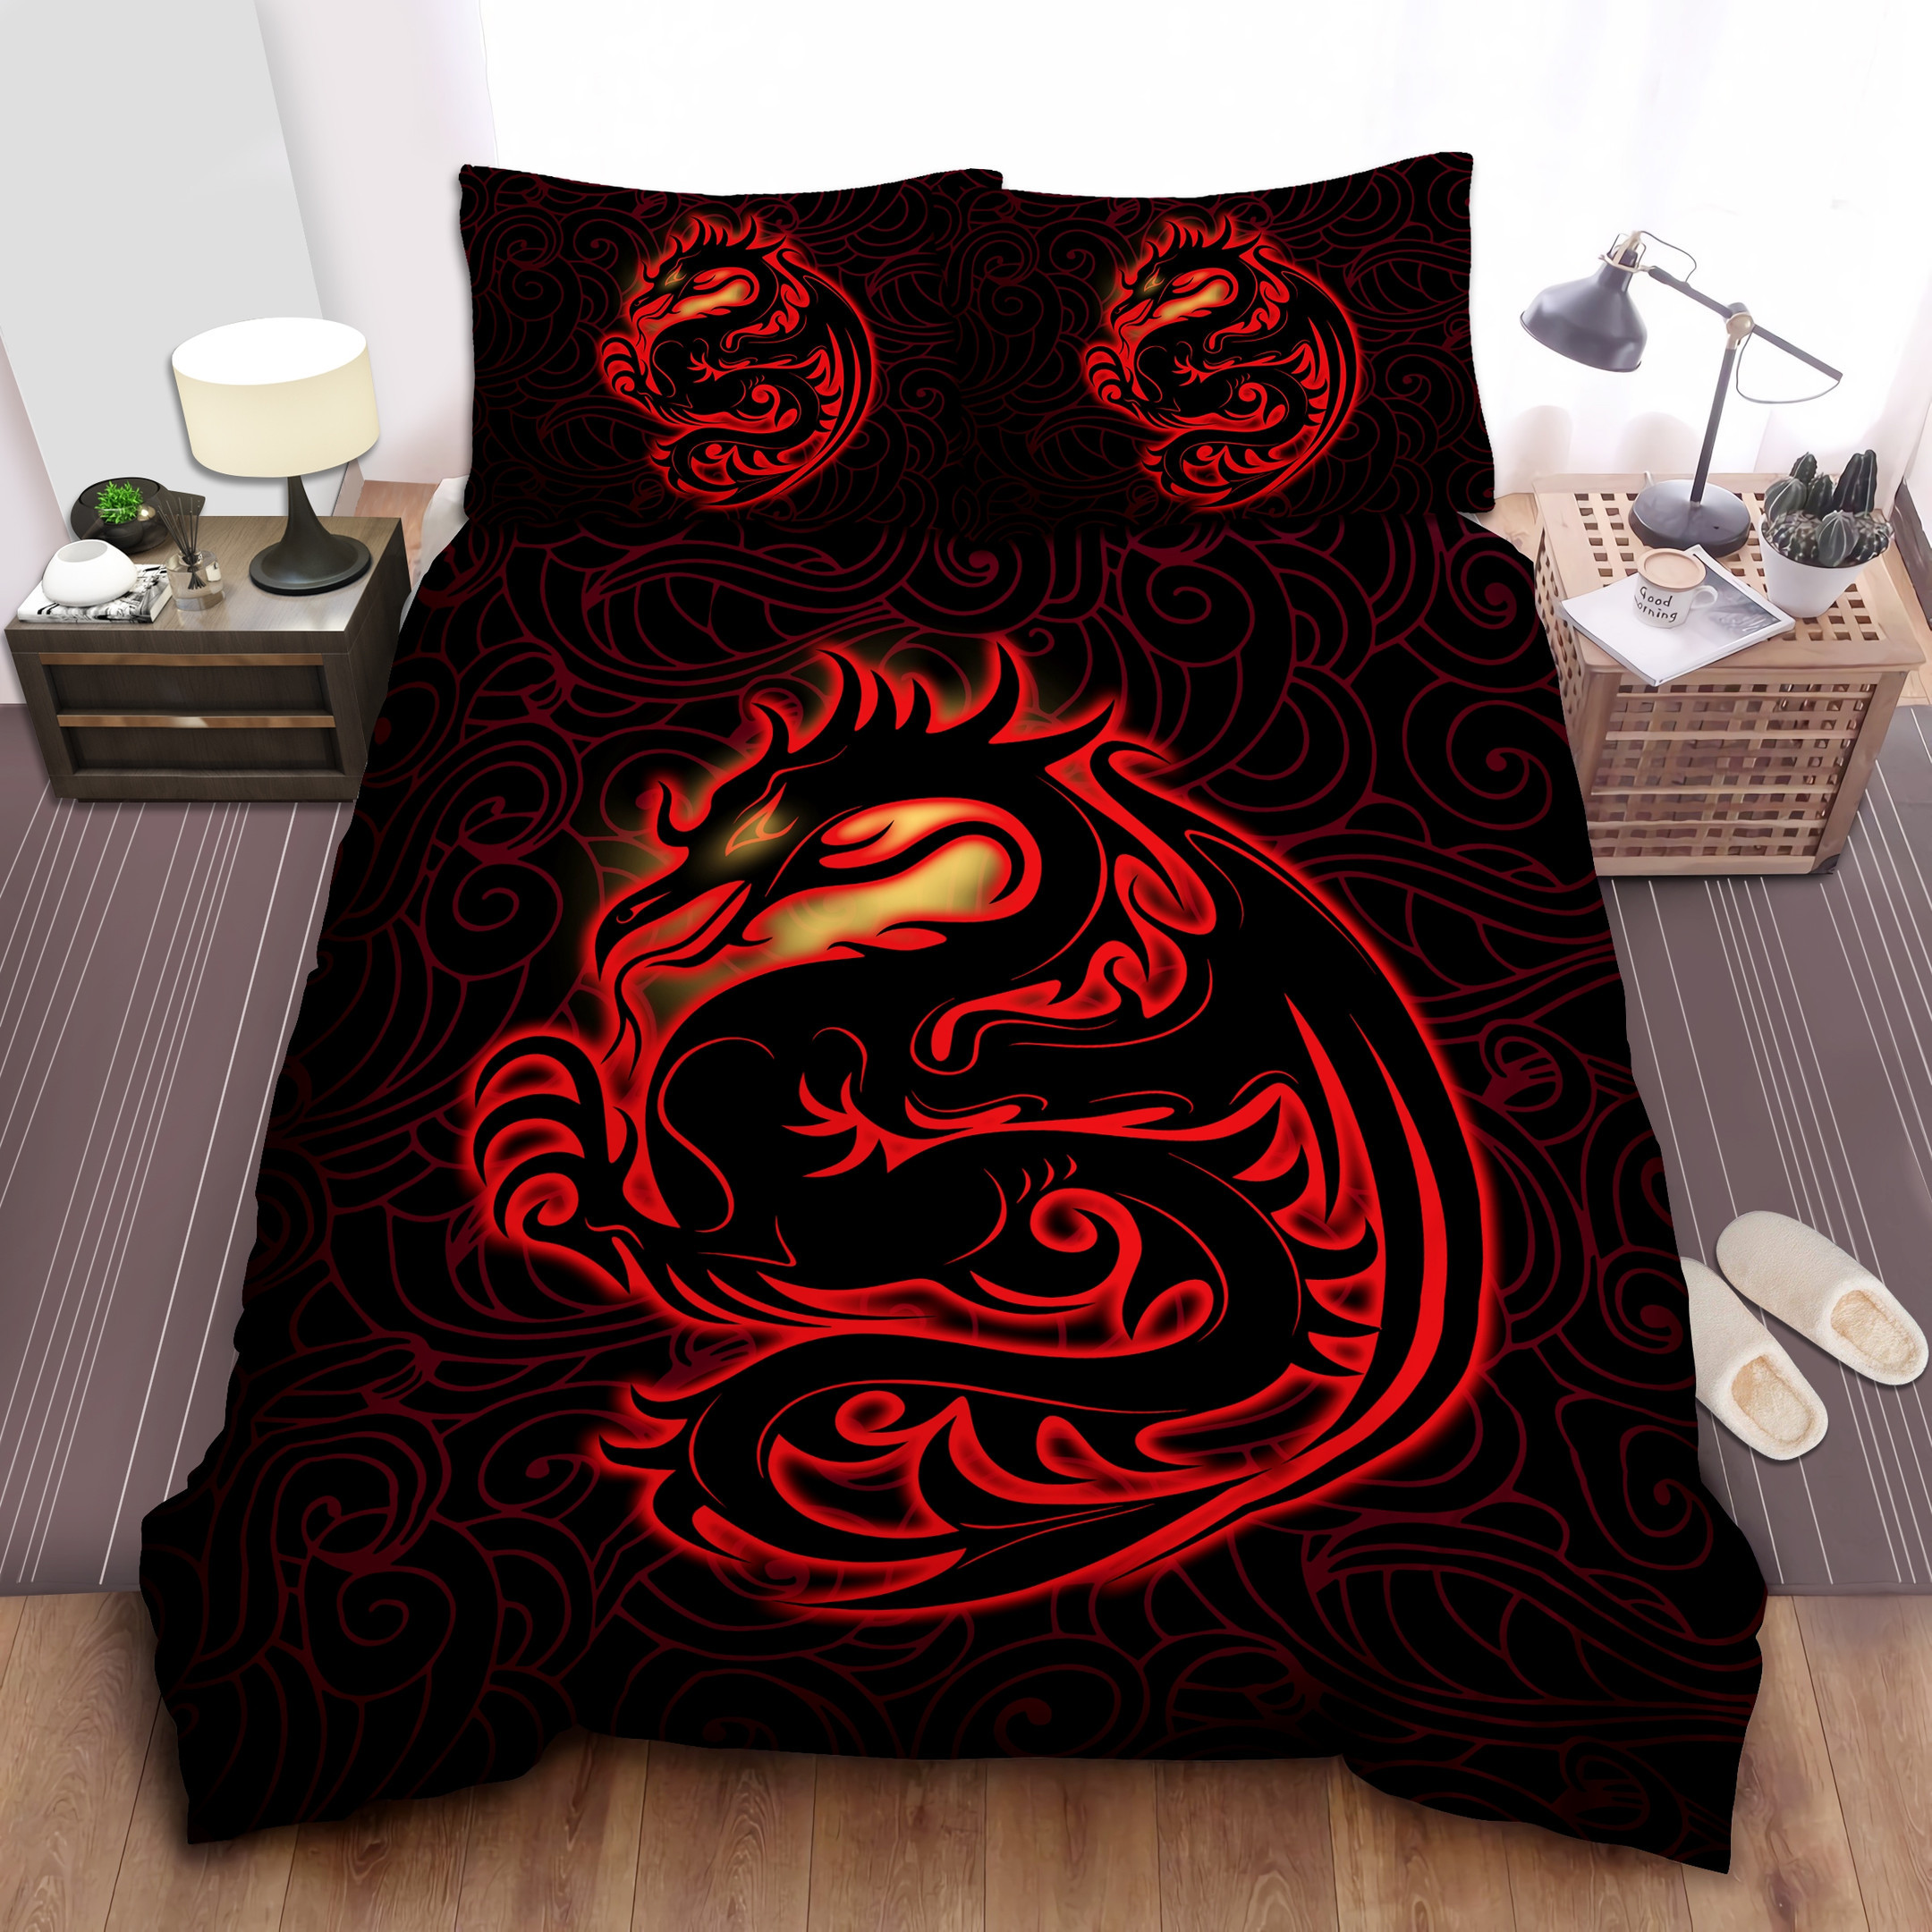 Dragon Tribal Tattoo 3dcotton Bed Sheets Spread Comforter Duvet Cover Bedding Sets